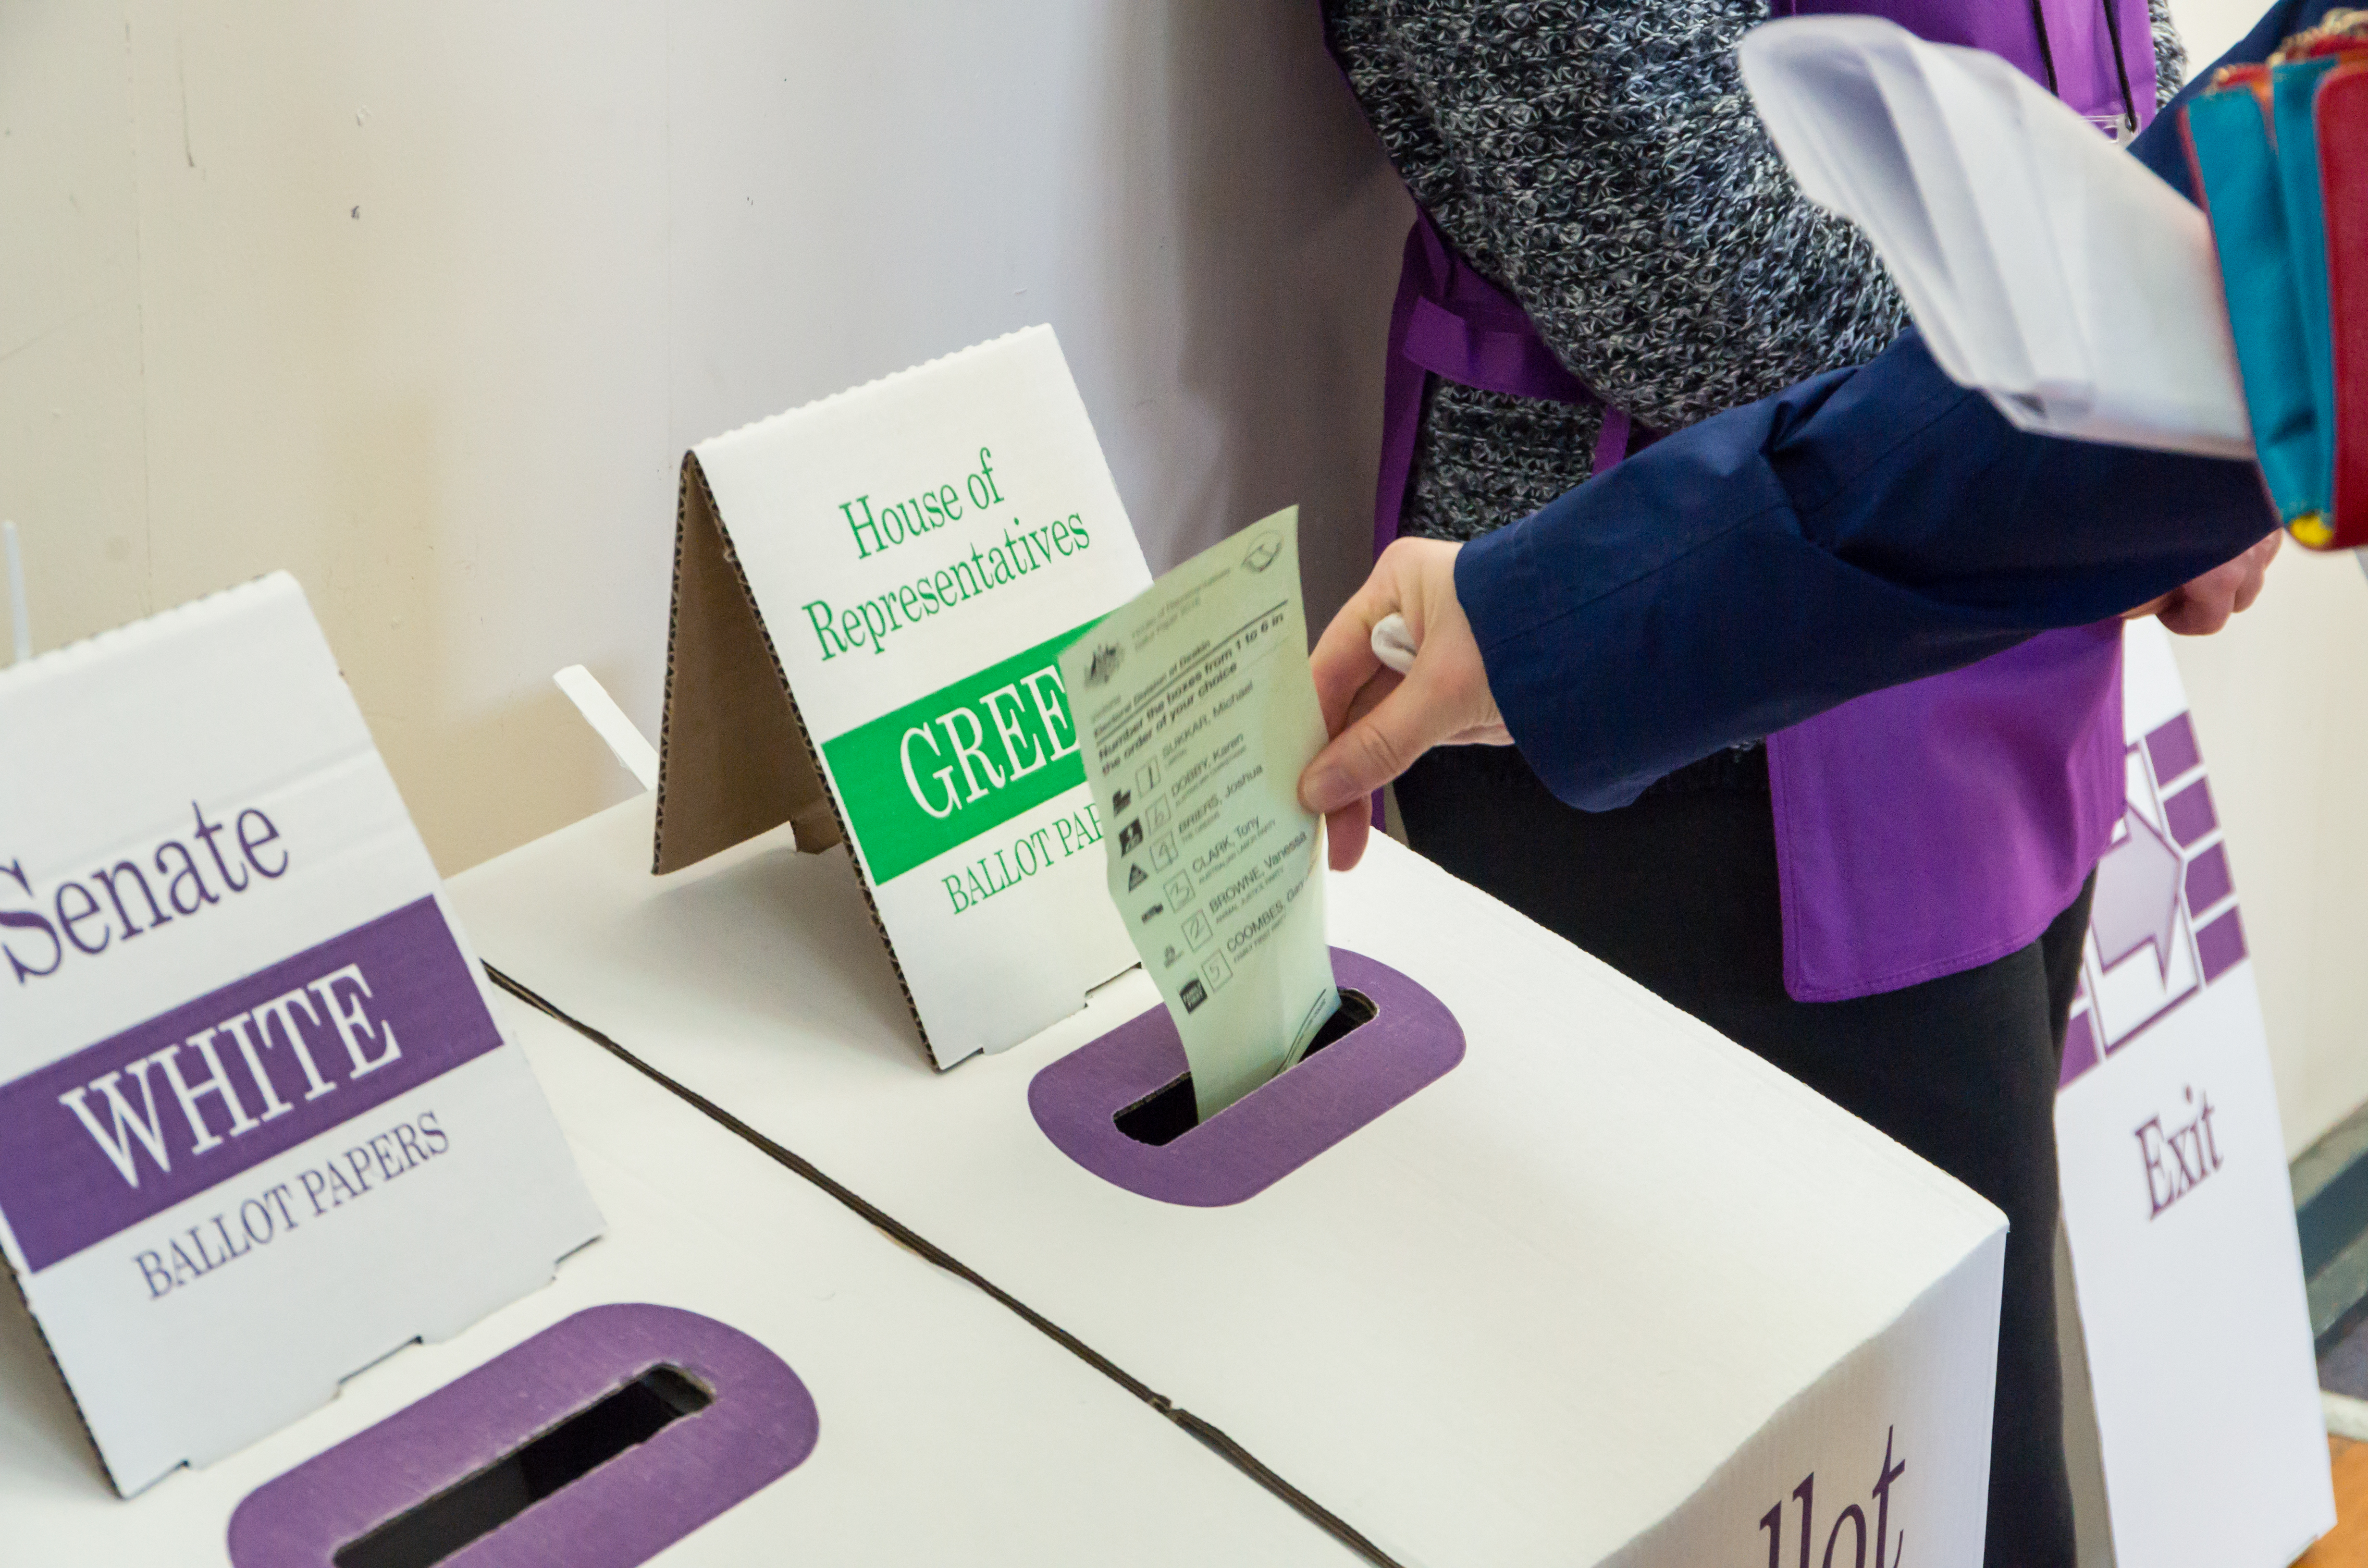 A voting paper is placed in a ballot box